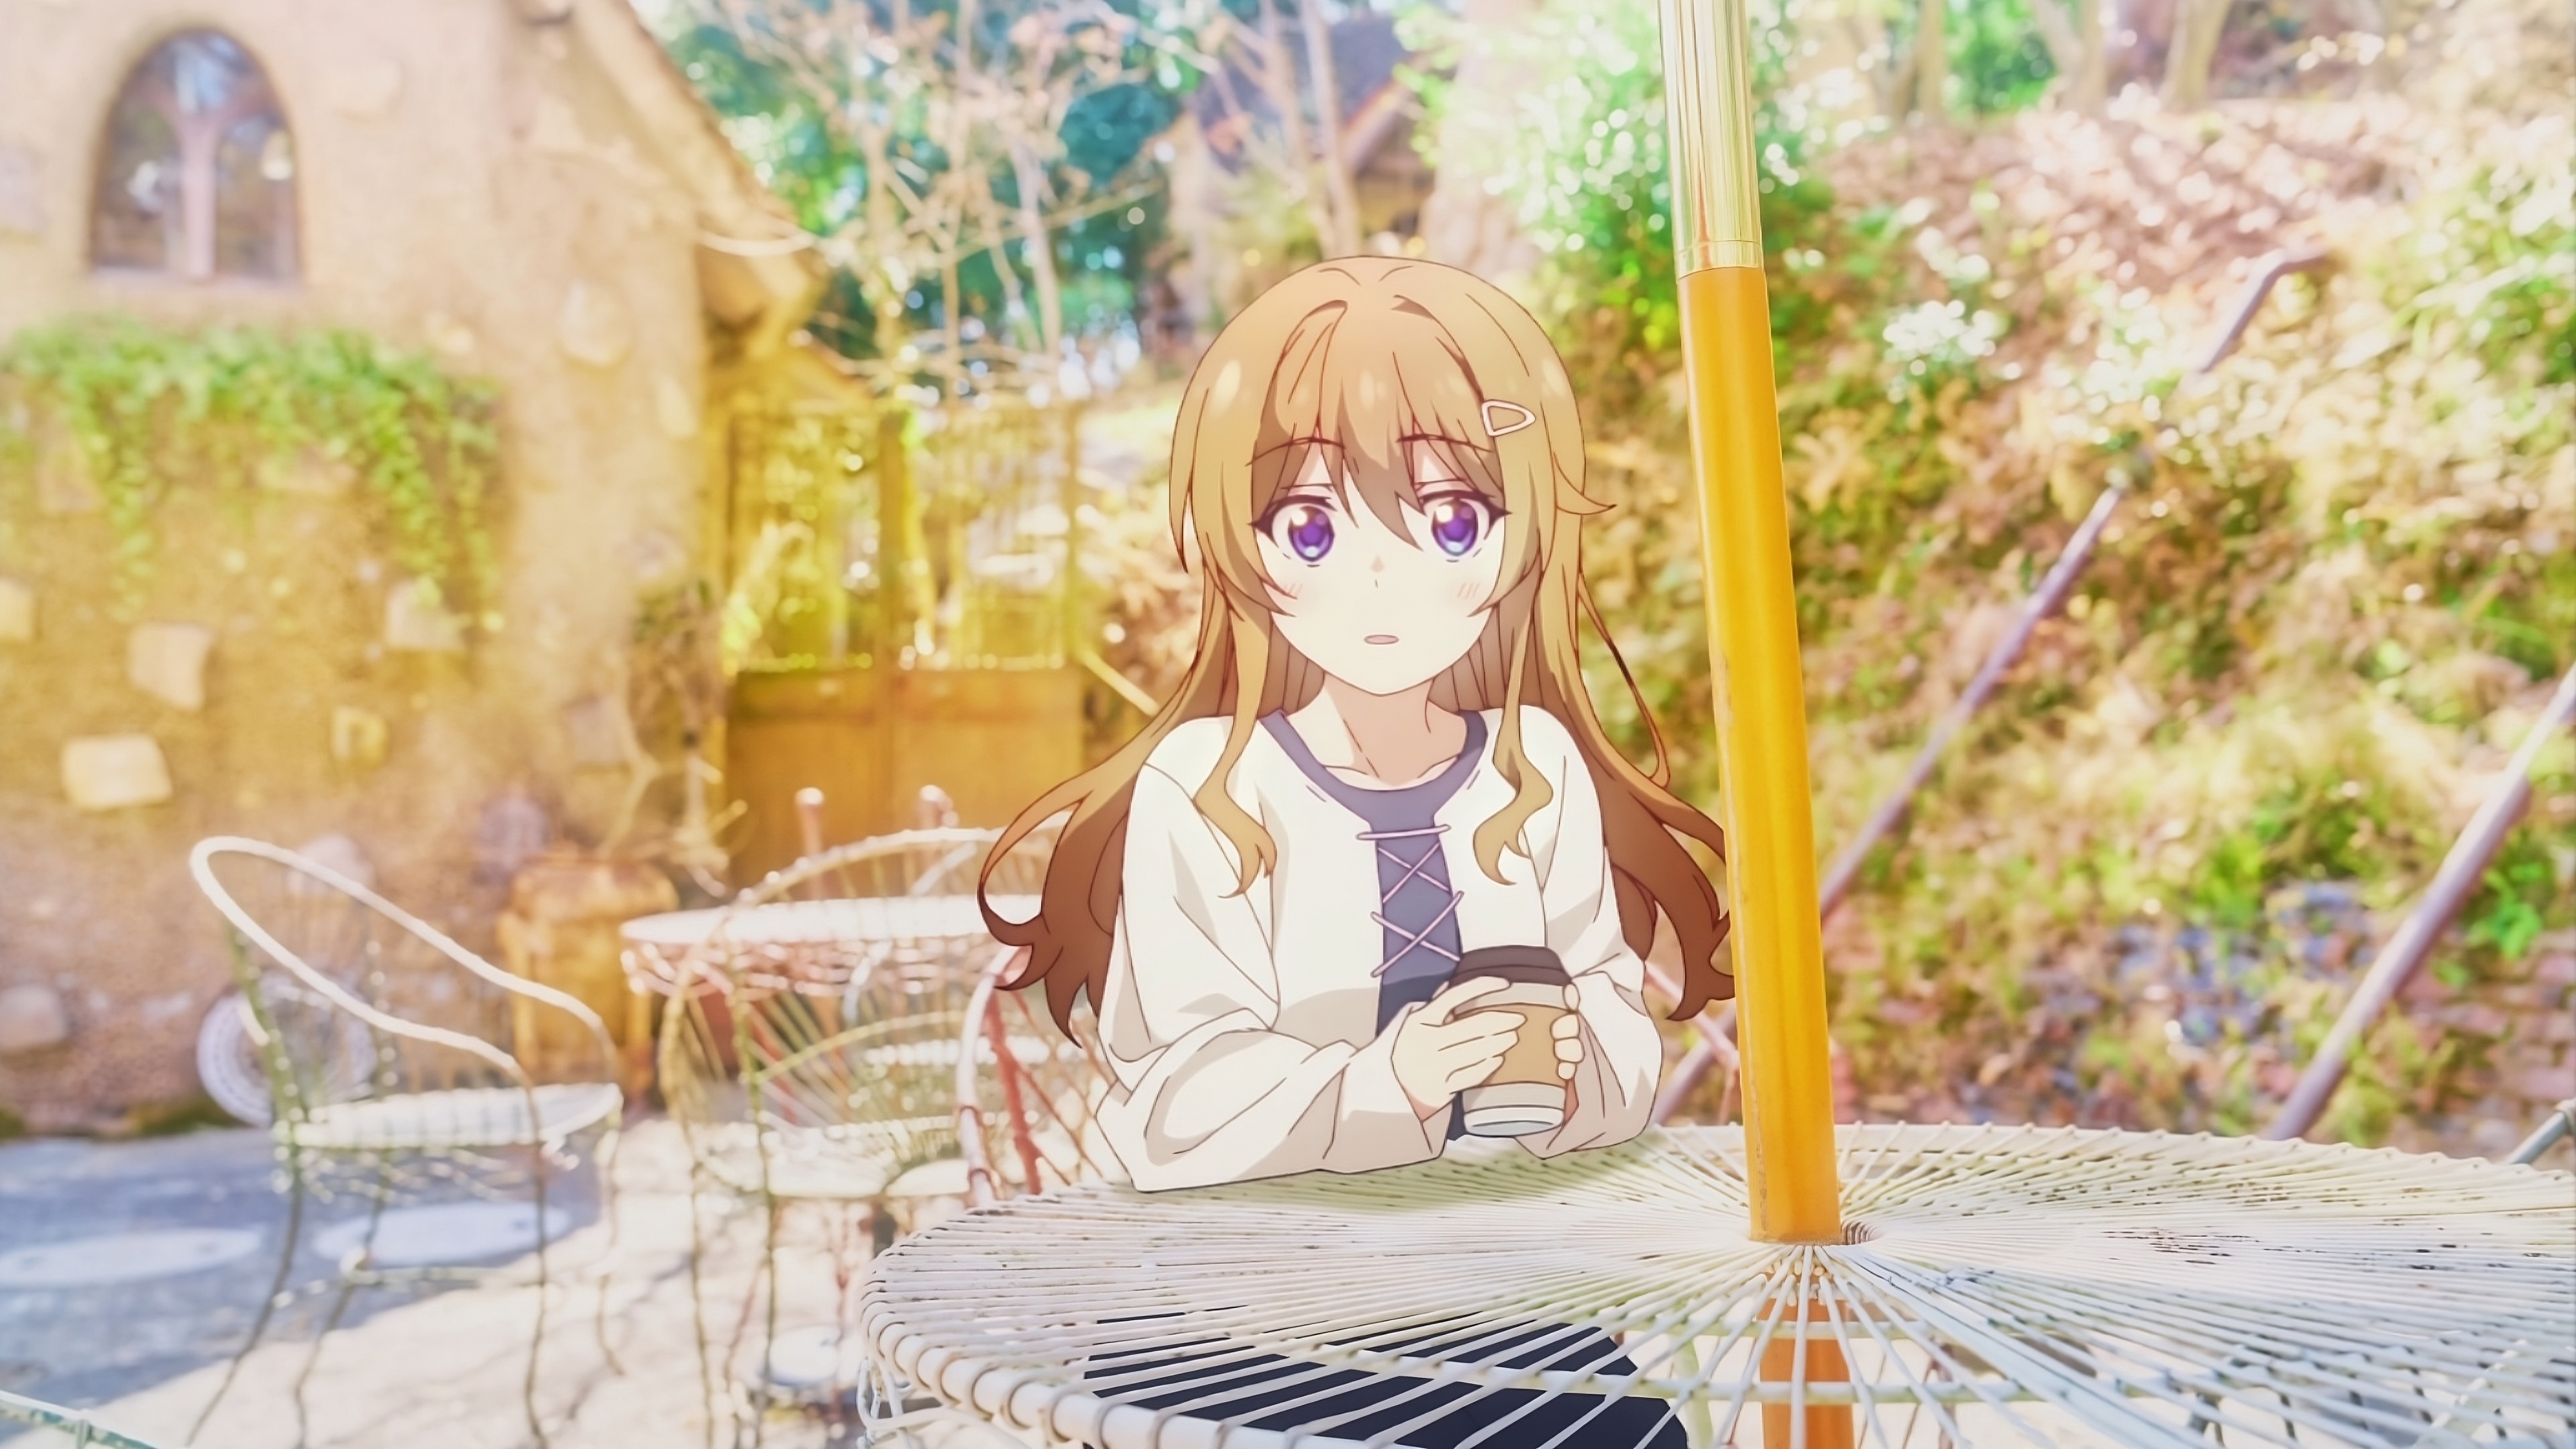 Anime 3840x2160 The Dreaming Boy is a Realist anime anime girls Anime screenshot sitting long hair looking at viewer chair table animeirl